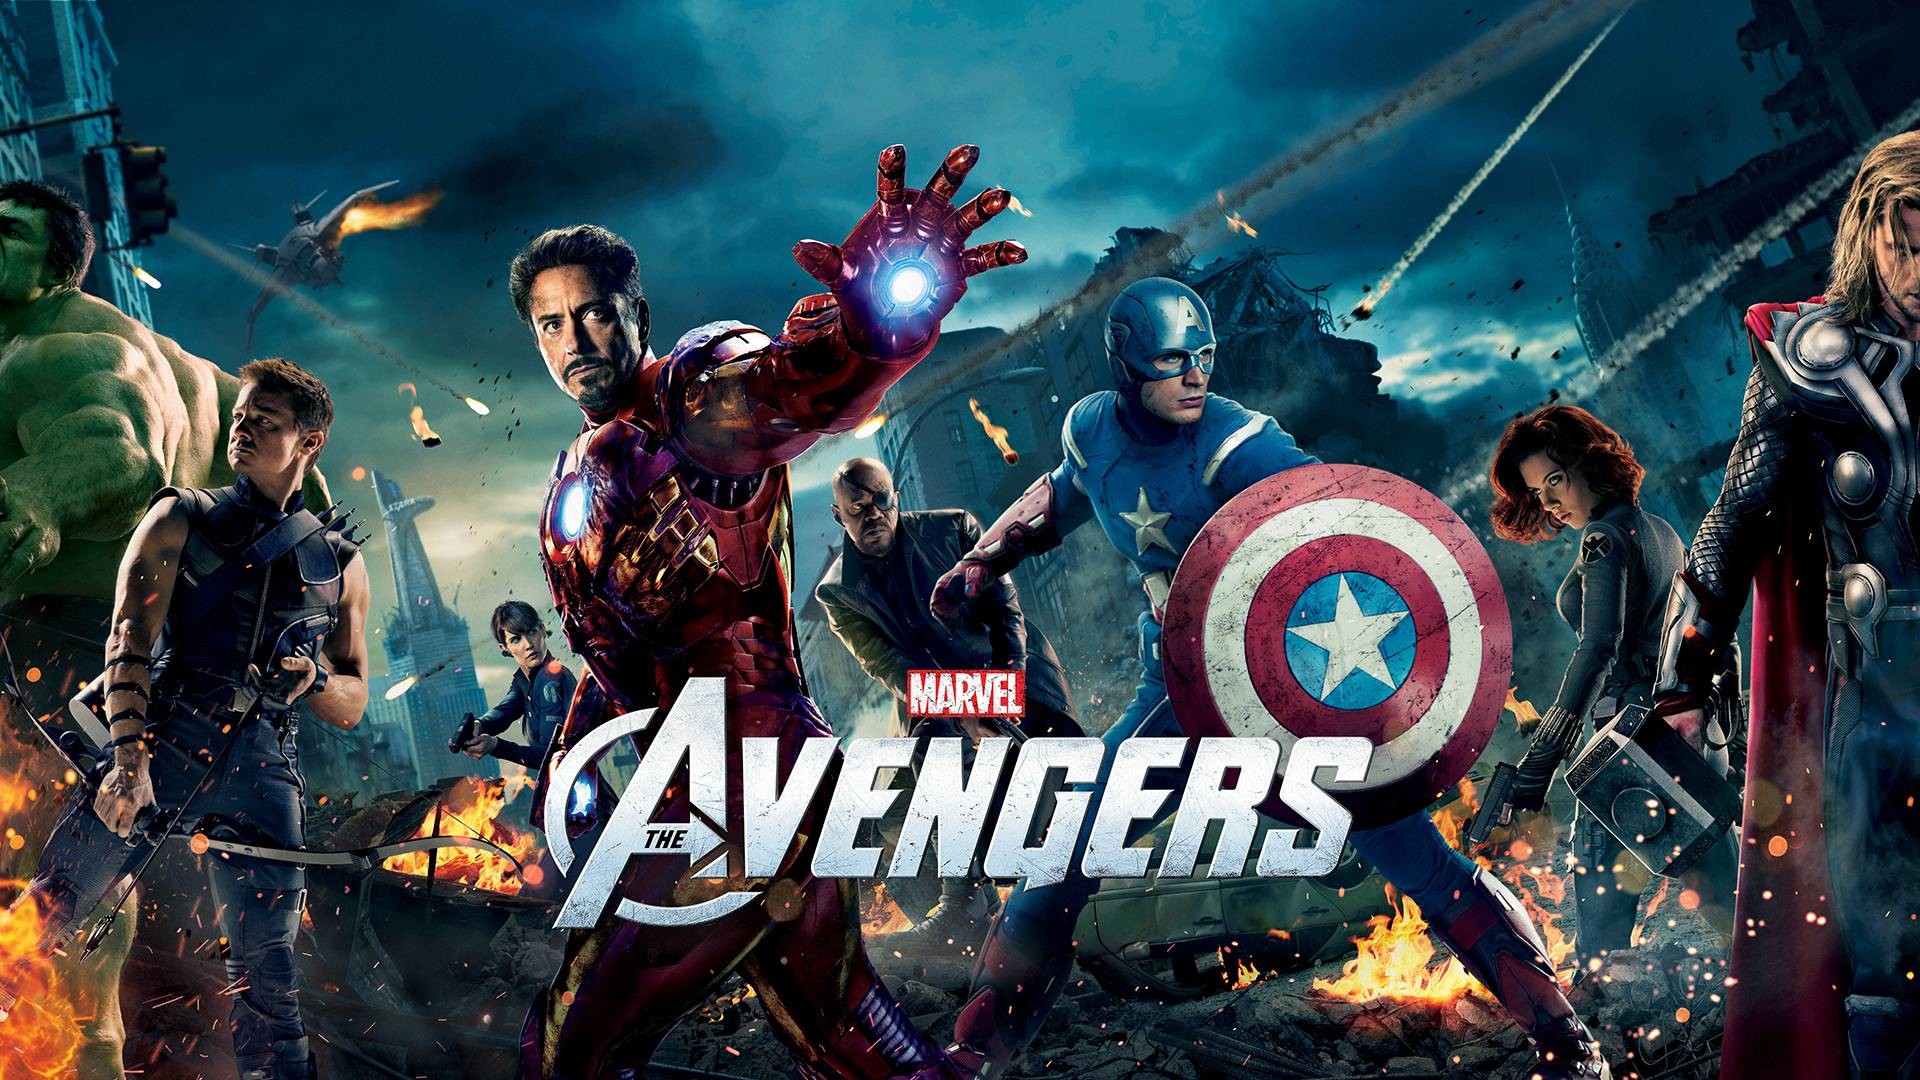 The Avengers HD Wallpaper Free Download HD Free Wallpapers Download